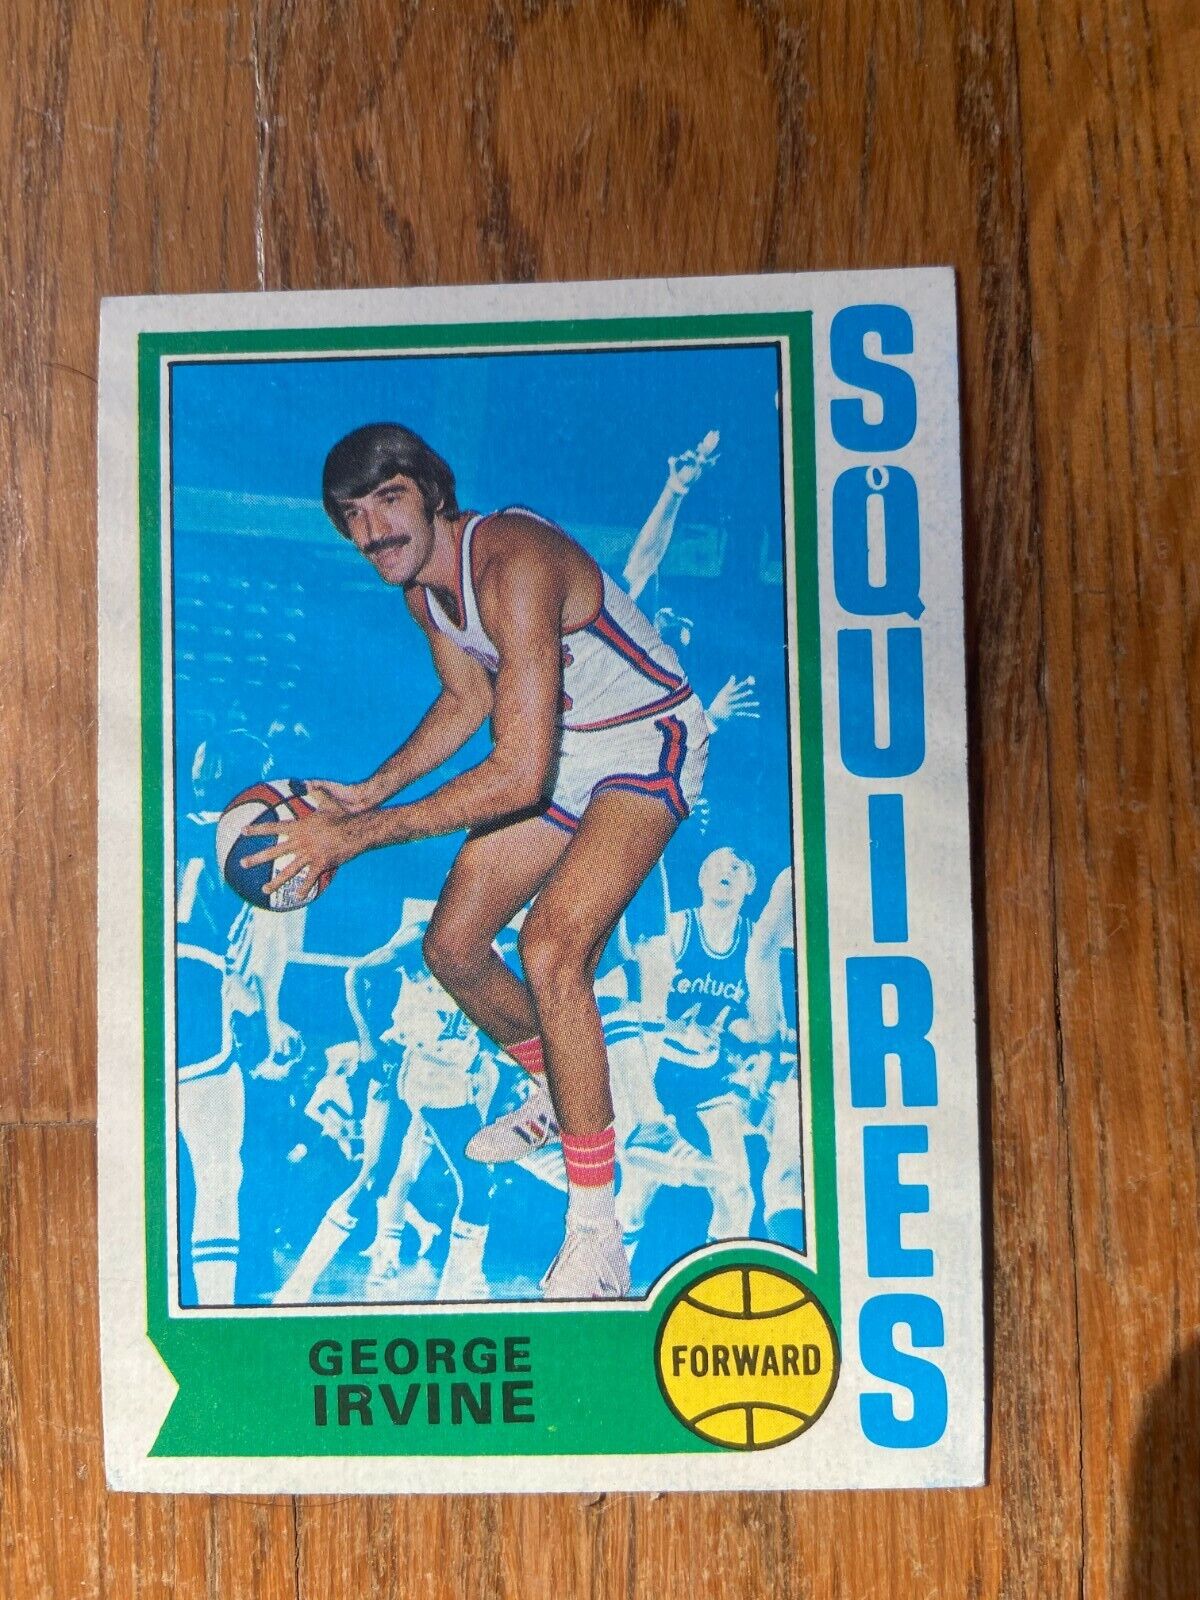 1974-75 Topps George Irvine Basketball Card #233 Virginia Squires